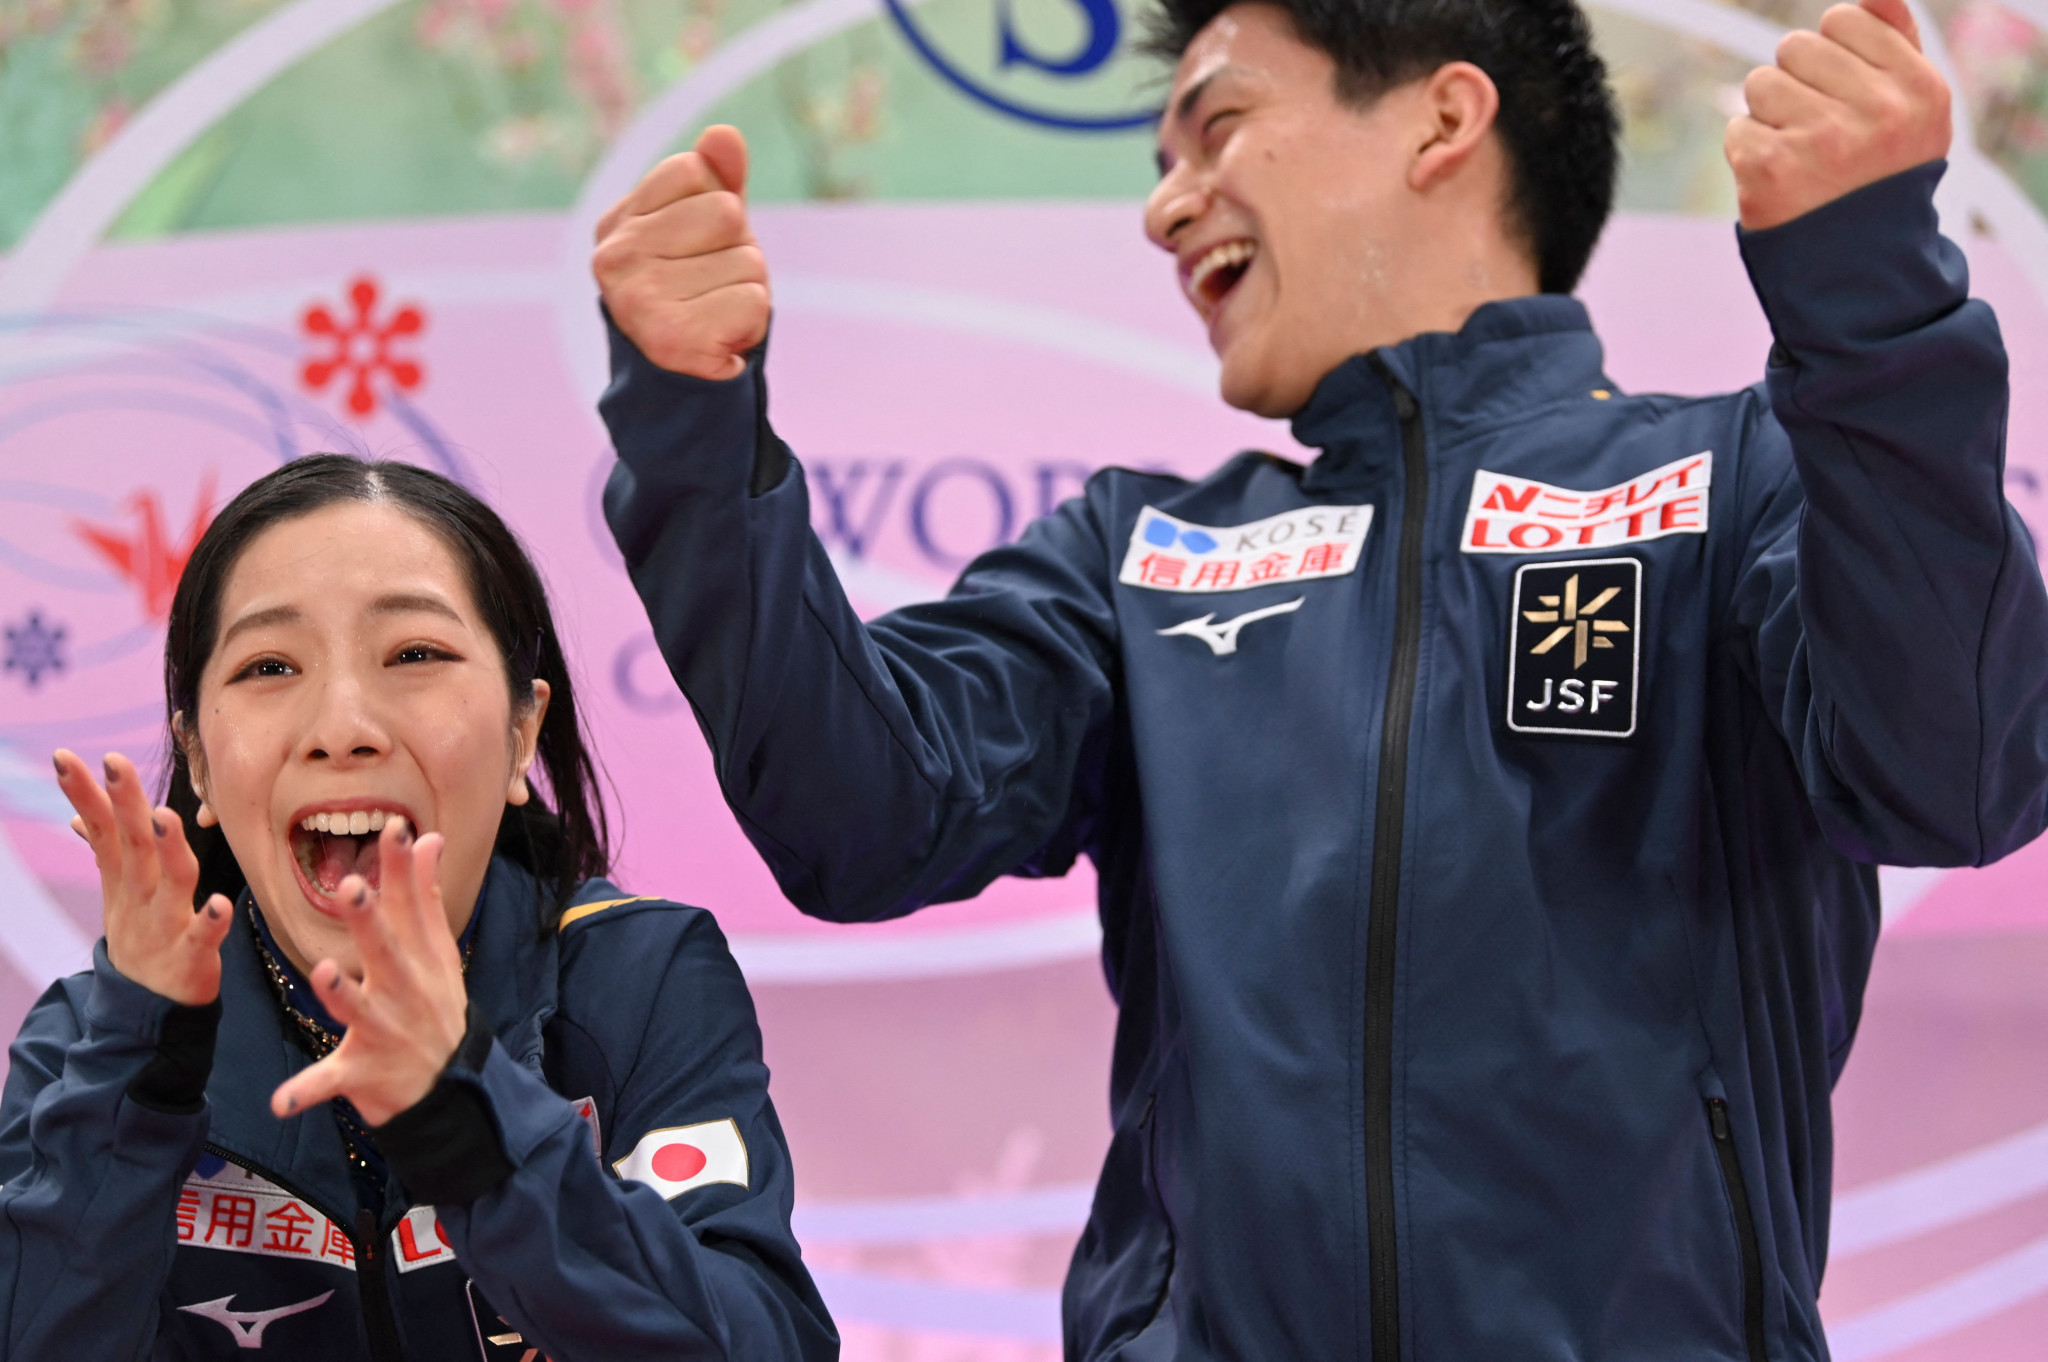 Japan's Riku Miura, left, and Ryuichi Kihara, right, earned their country's first pairs title at the World Figure Skating Championships ©Getty Images